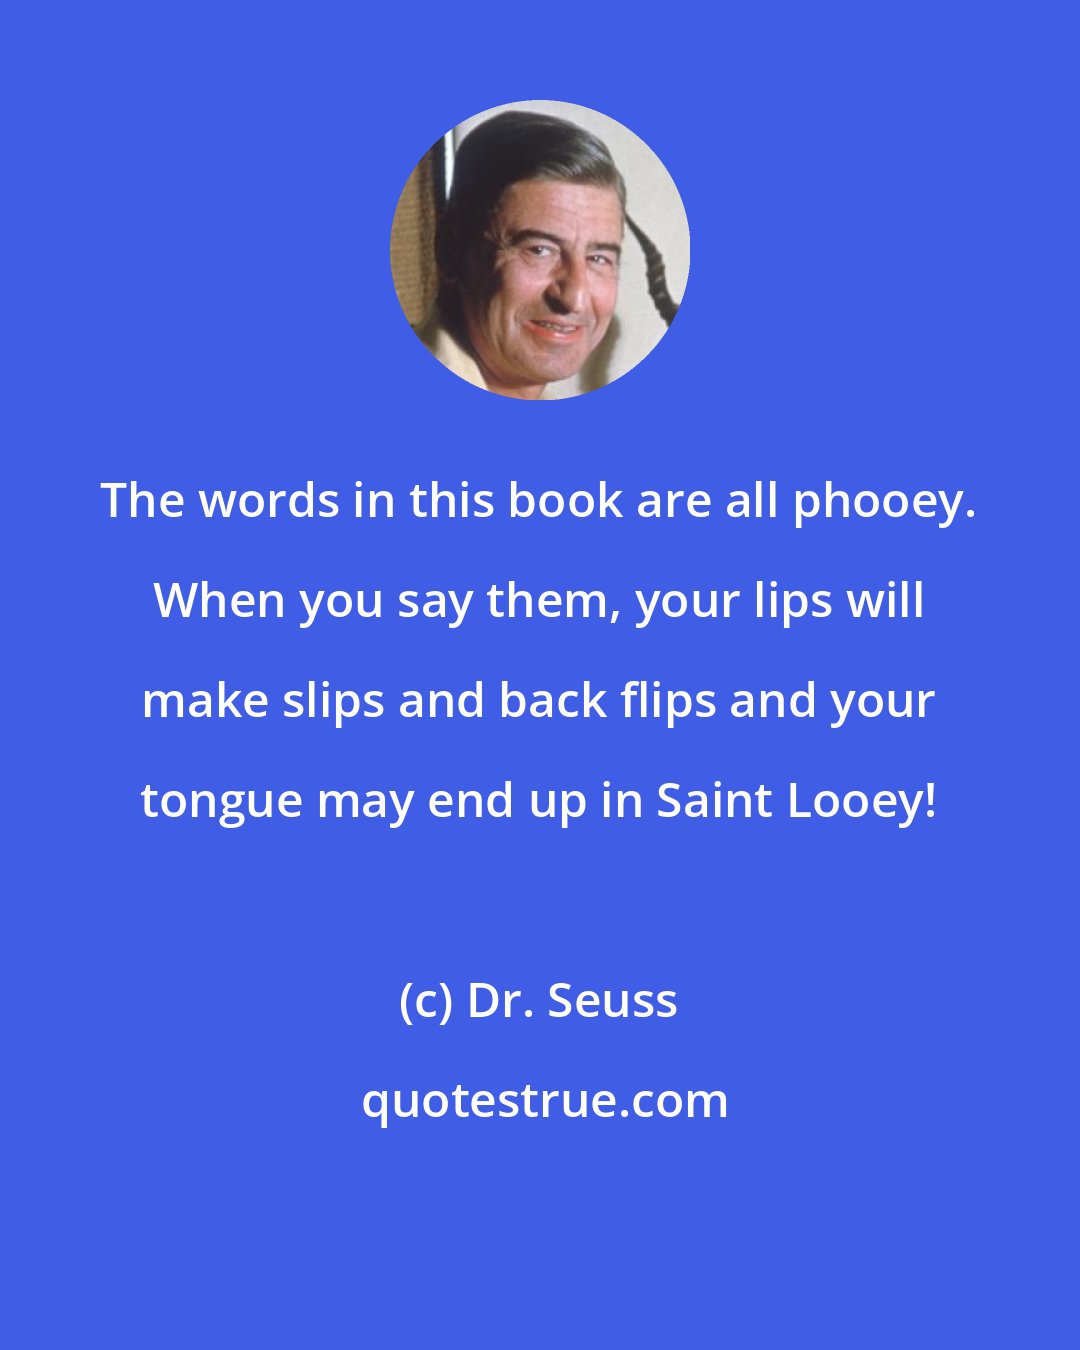 Dr. Seuss: The words in this book are all phooey. When you say them, your lips will make slips and back flips and your tongue may end up in Saint Looey!